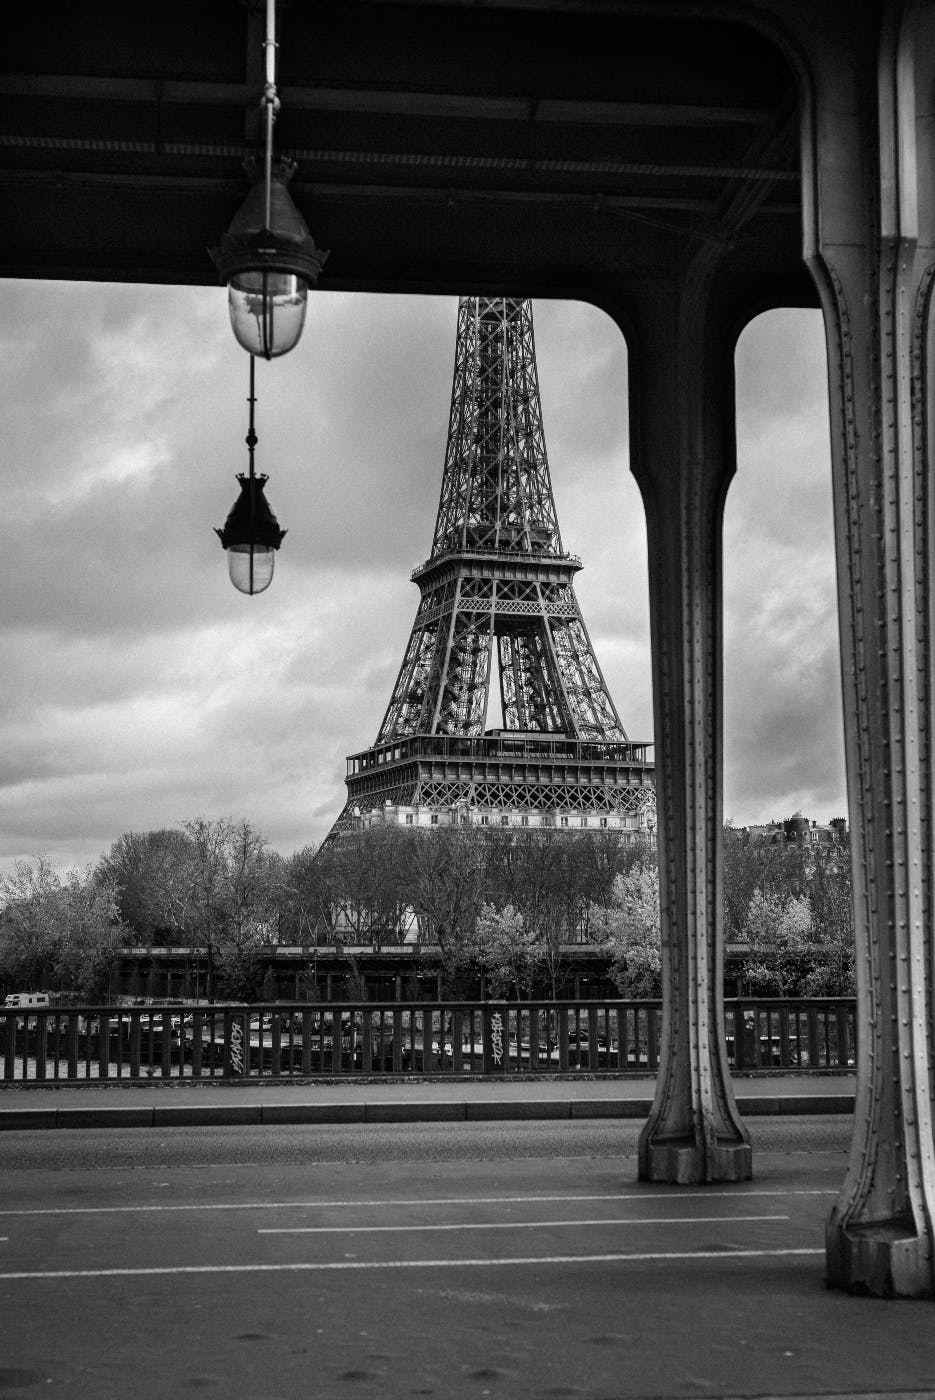  grey scale image of the Eiffel Tower